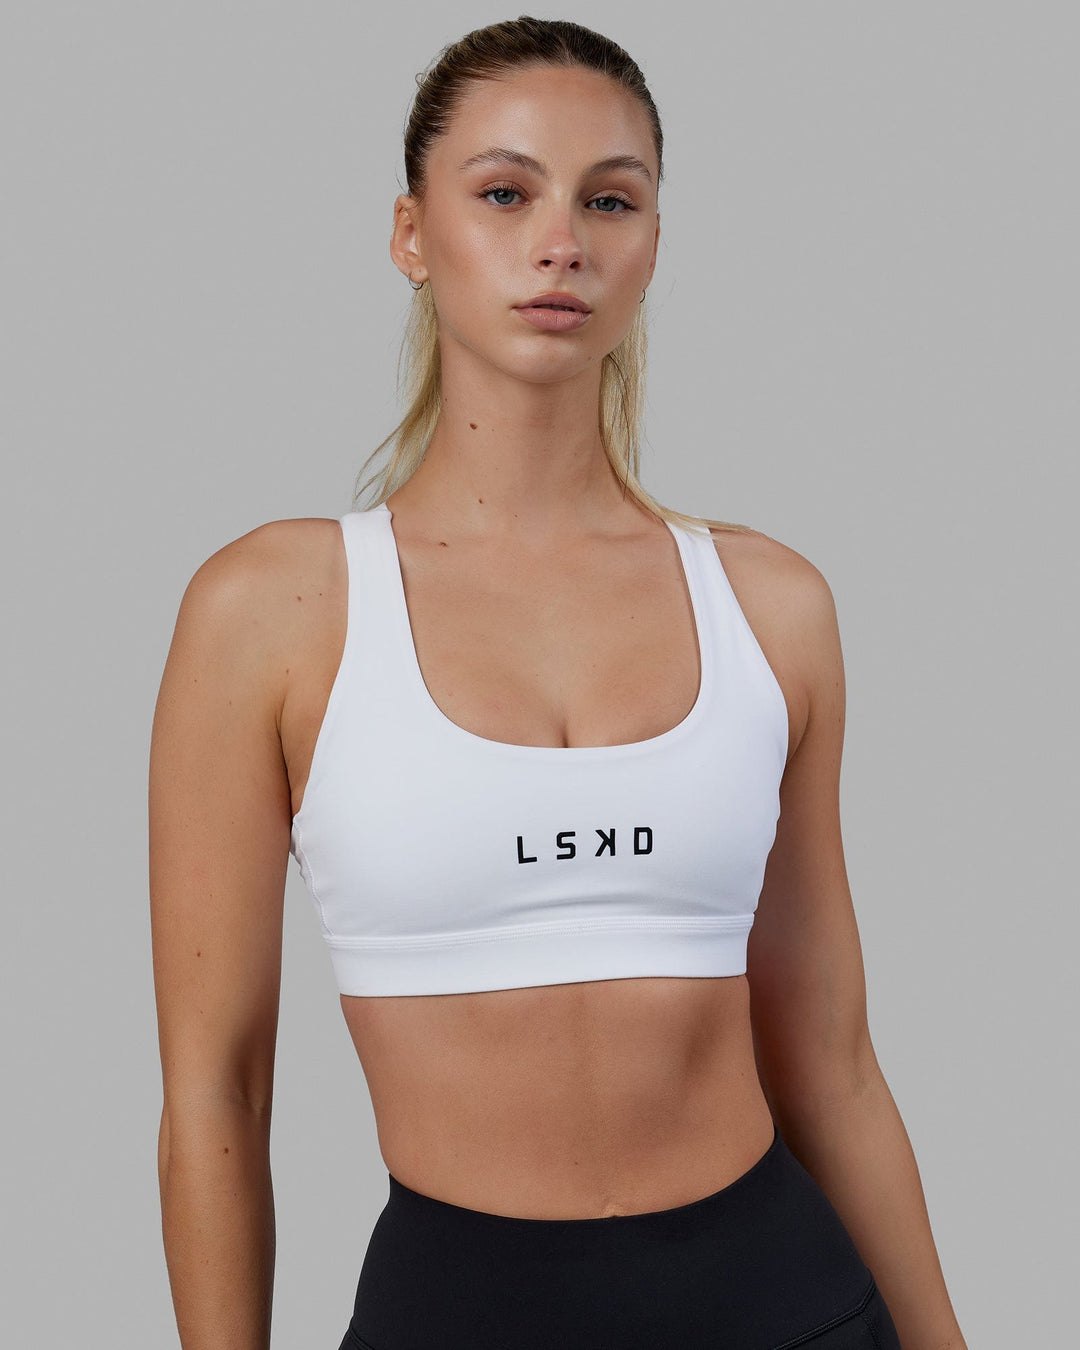 LSKD - She's a sellout 😉💚 Meet the Energise Tights & Uplift Sports Bra 🤝  Made from our buttery soft 'Rep' fabric ✓ Shop Now (before they're gone) 👇  lskd.co/collections/georgie-stevenson-x-lskd